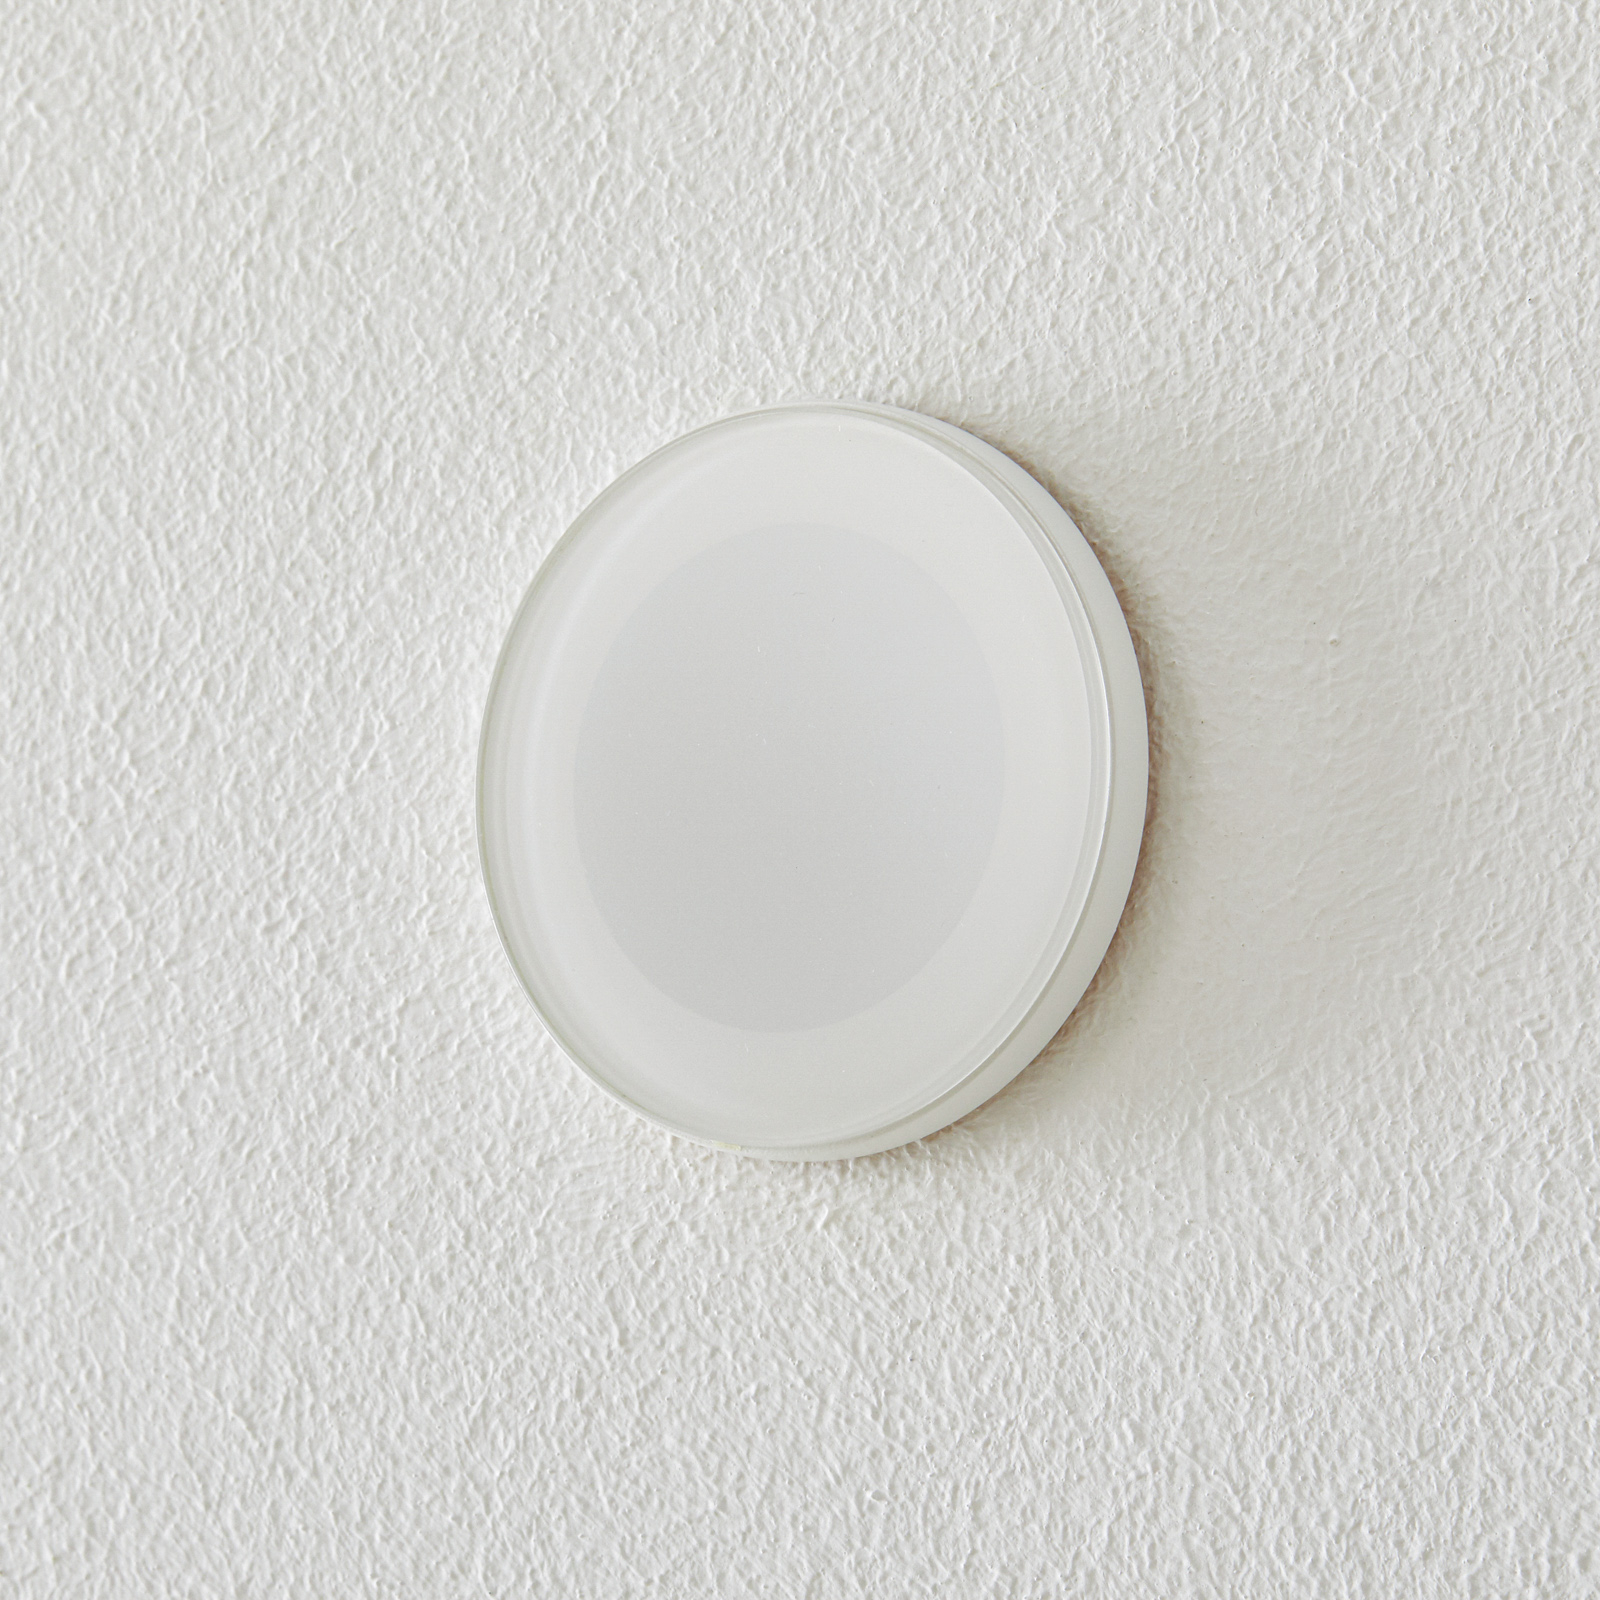 BEGA Accenta wall lamp round ring white 315 lm